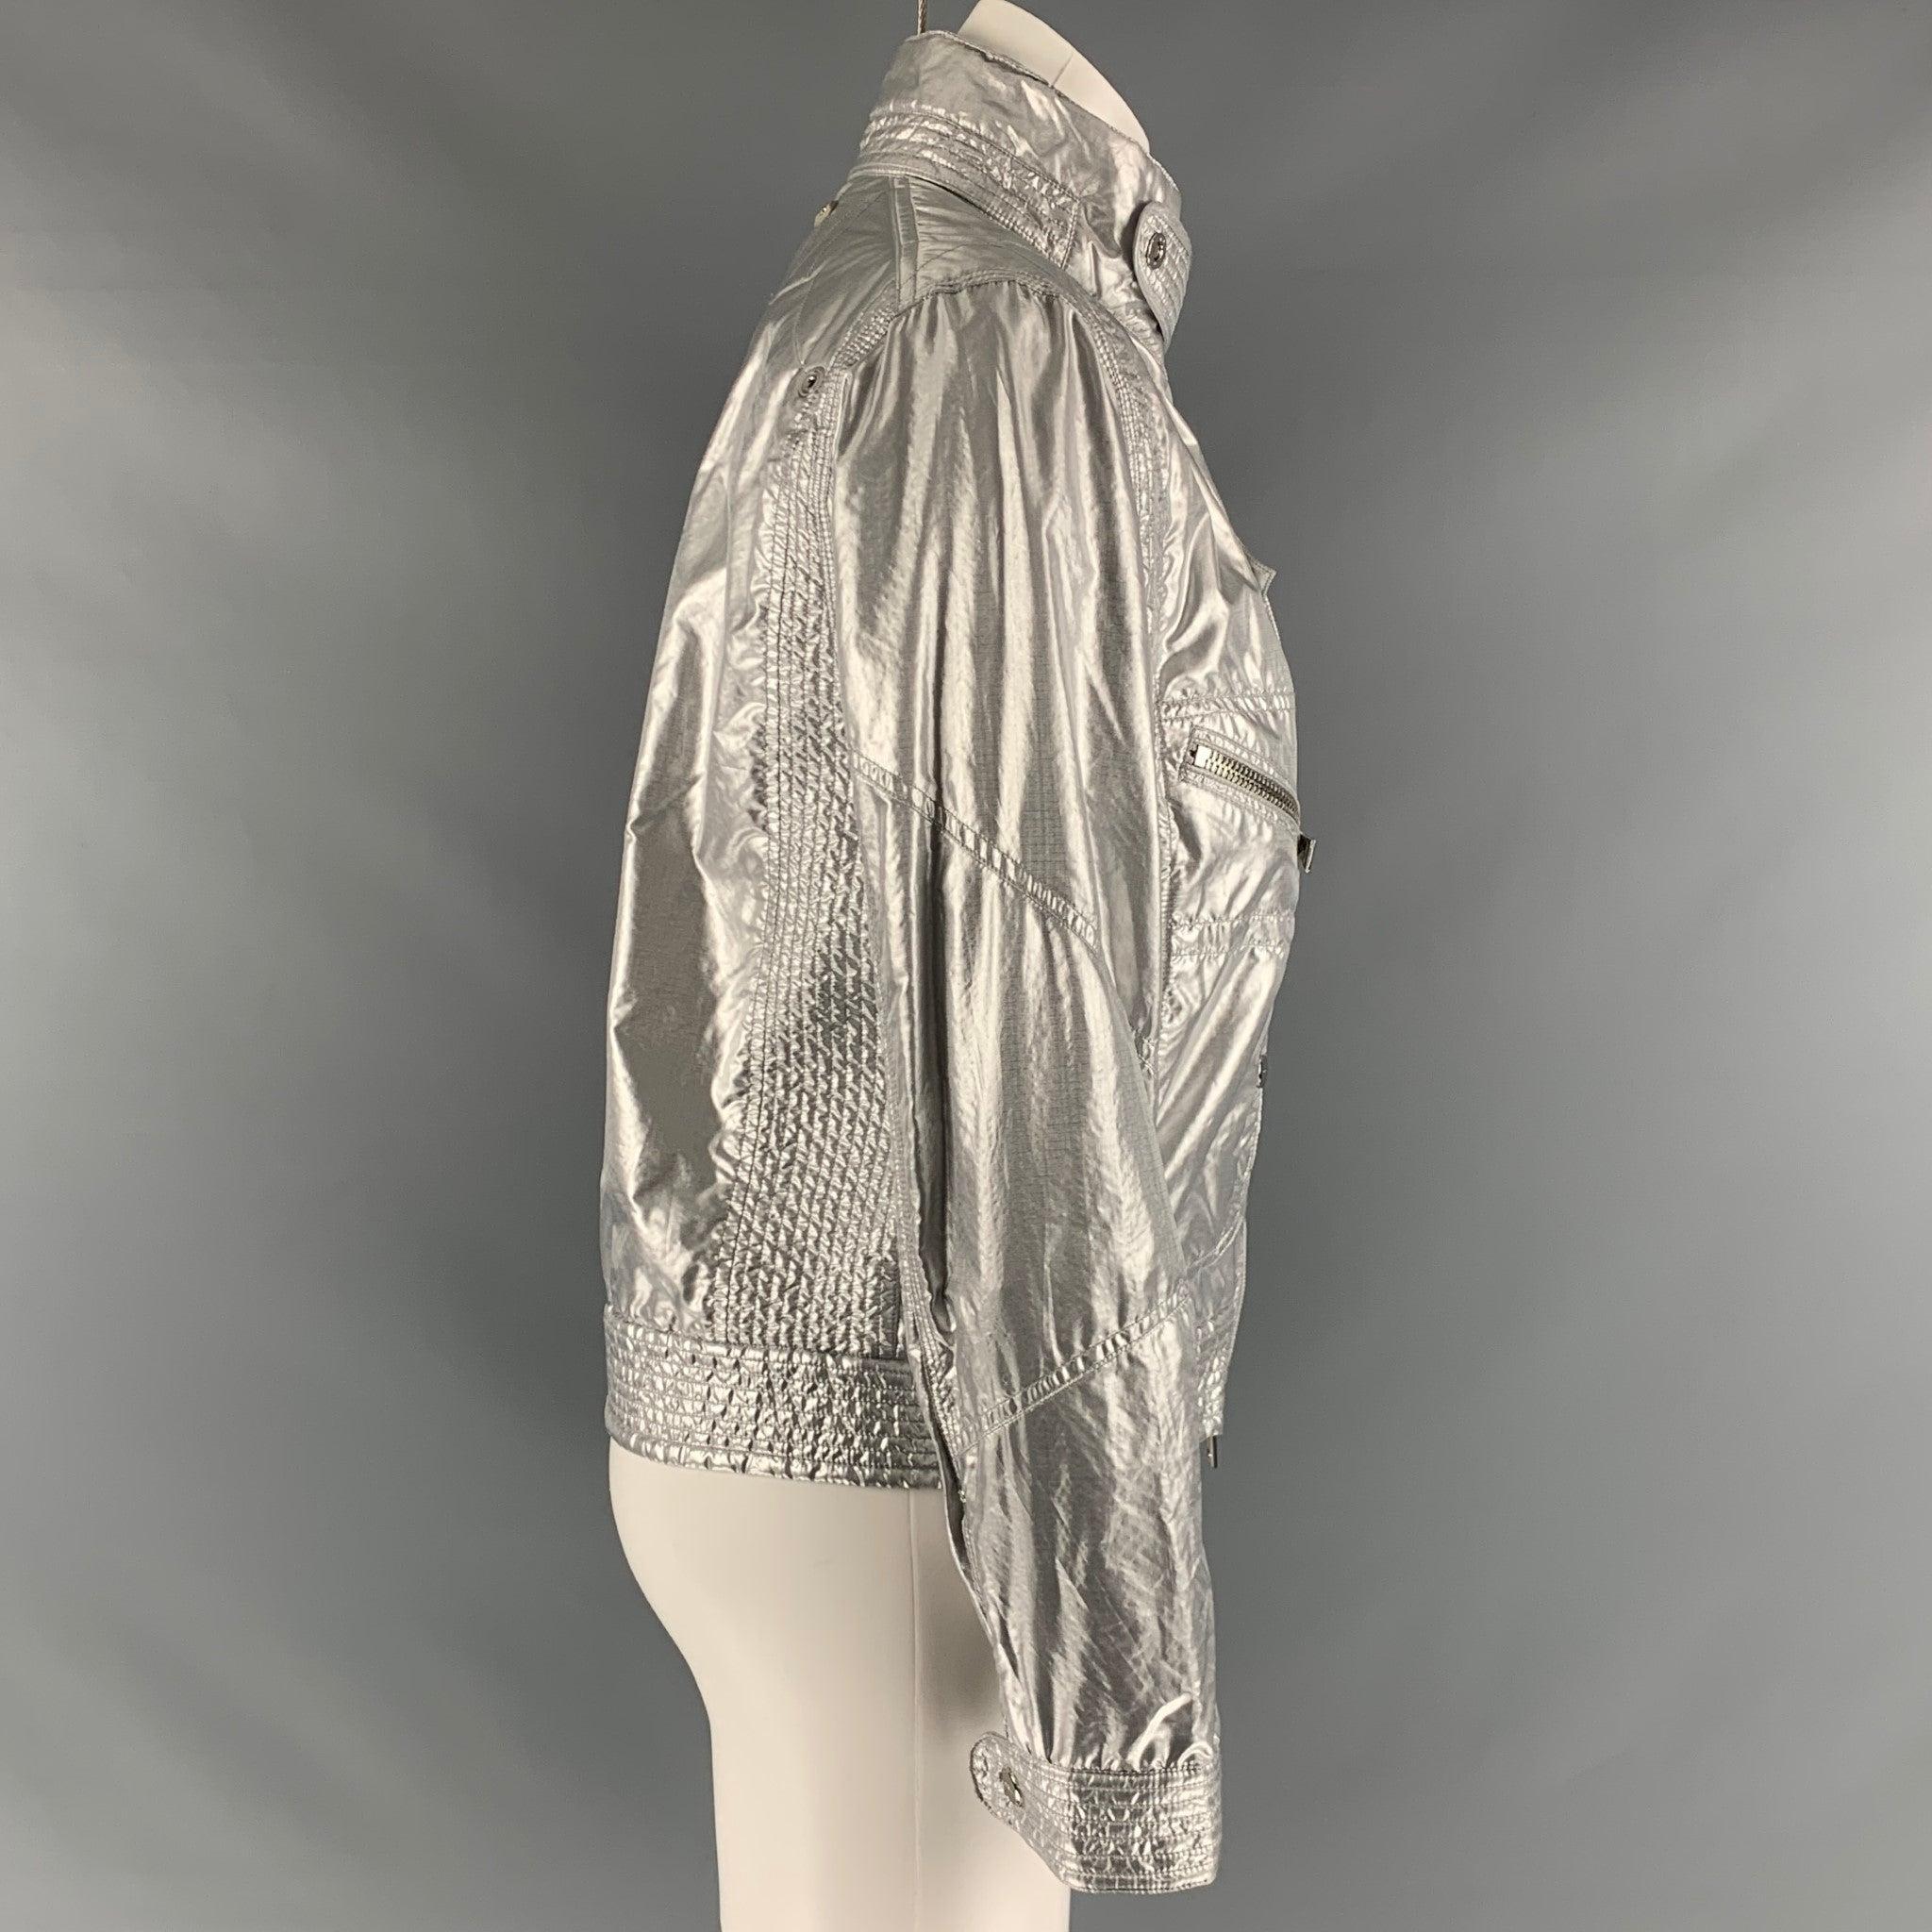 RALPH LAUREN BLACK LABEL jacket comes in a silver tone metallic nylon blend featuring a high neck, zipper pockets, silver tone hardware, and a full zip up closure. Excellent Pre- Owned Material. 

Marked:   8 

Measurements: 
 
Shoulder: 16 inches